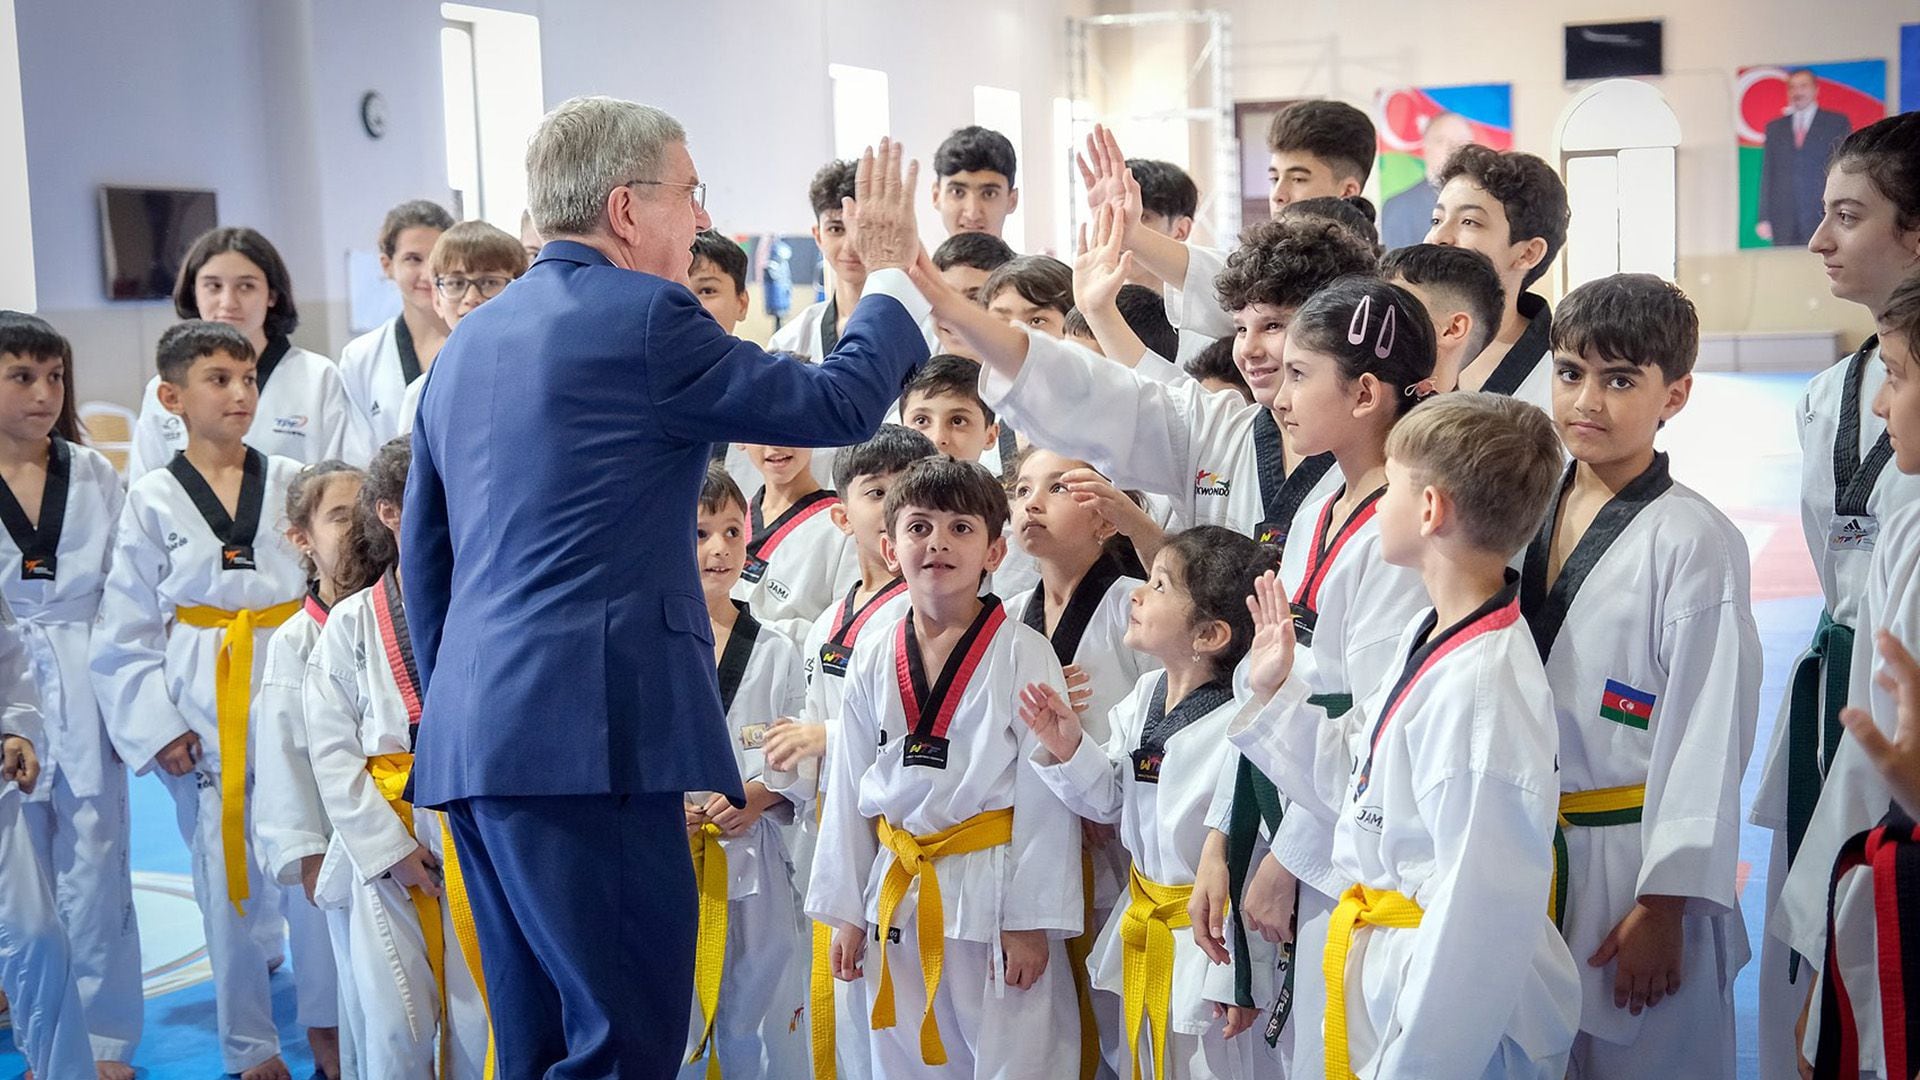 Thomas Bach, very connected to taekwondo players of all ages during his stay in Azerbaijan.